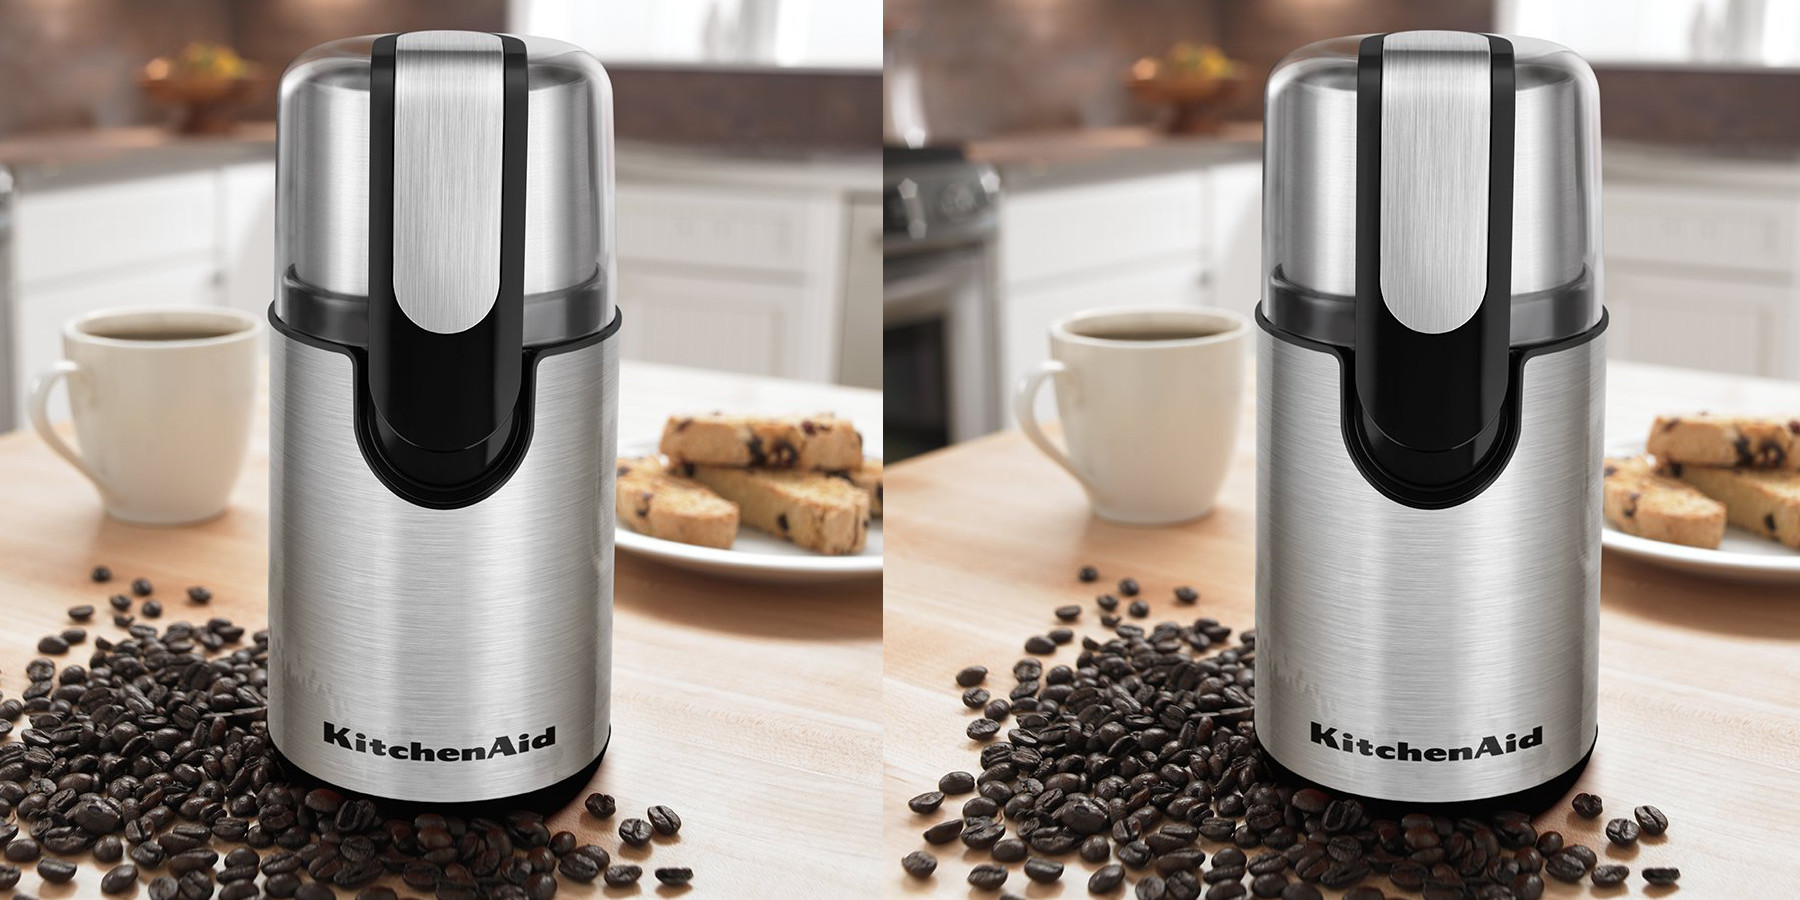 KitchenAid's Blade Coffee Grinder is nearly 35% off today, now $20